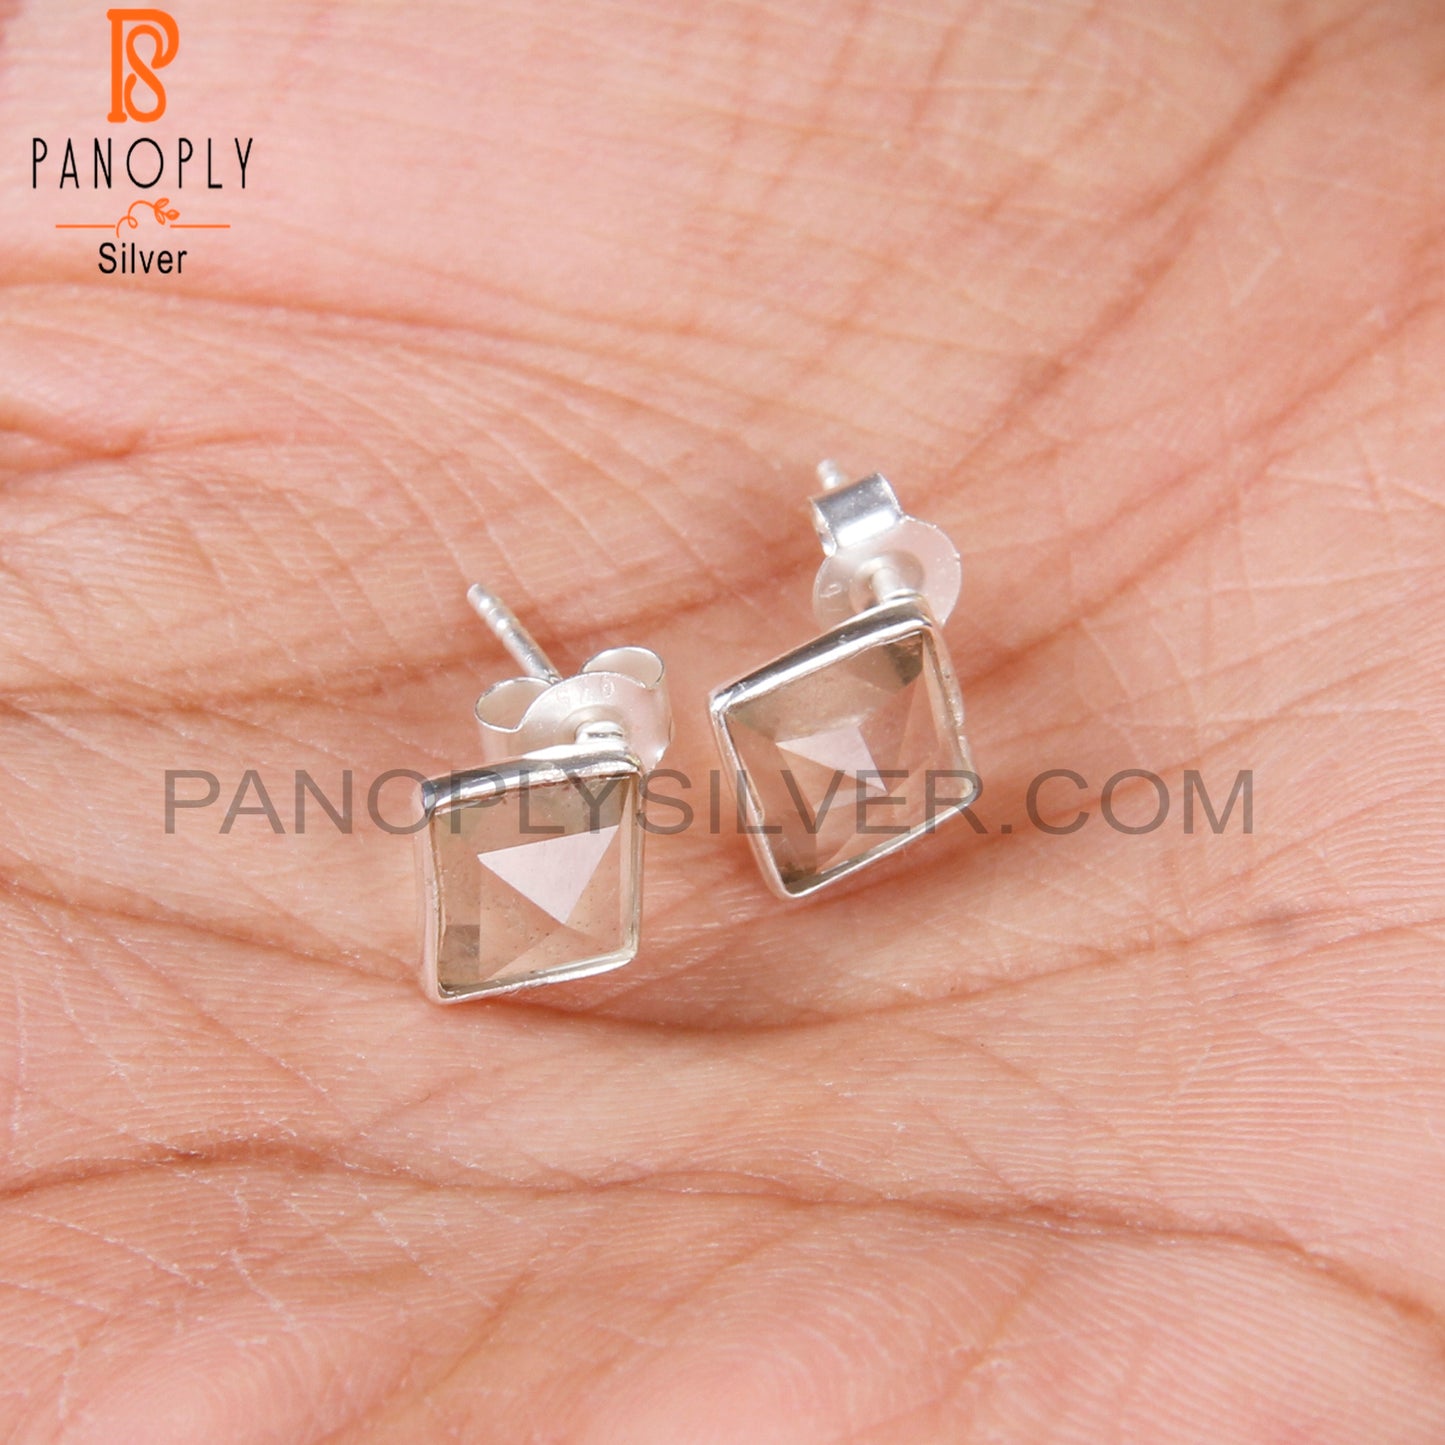 Green Amethyst Natural Square Sterling Silver Studs Earrings